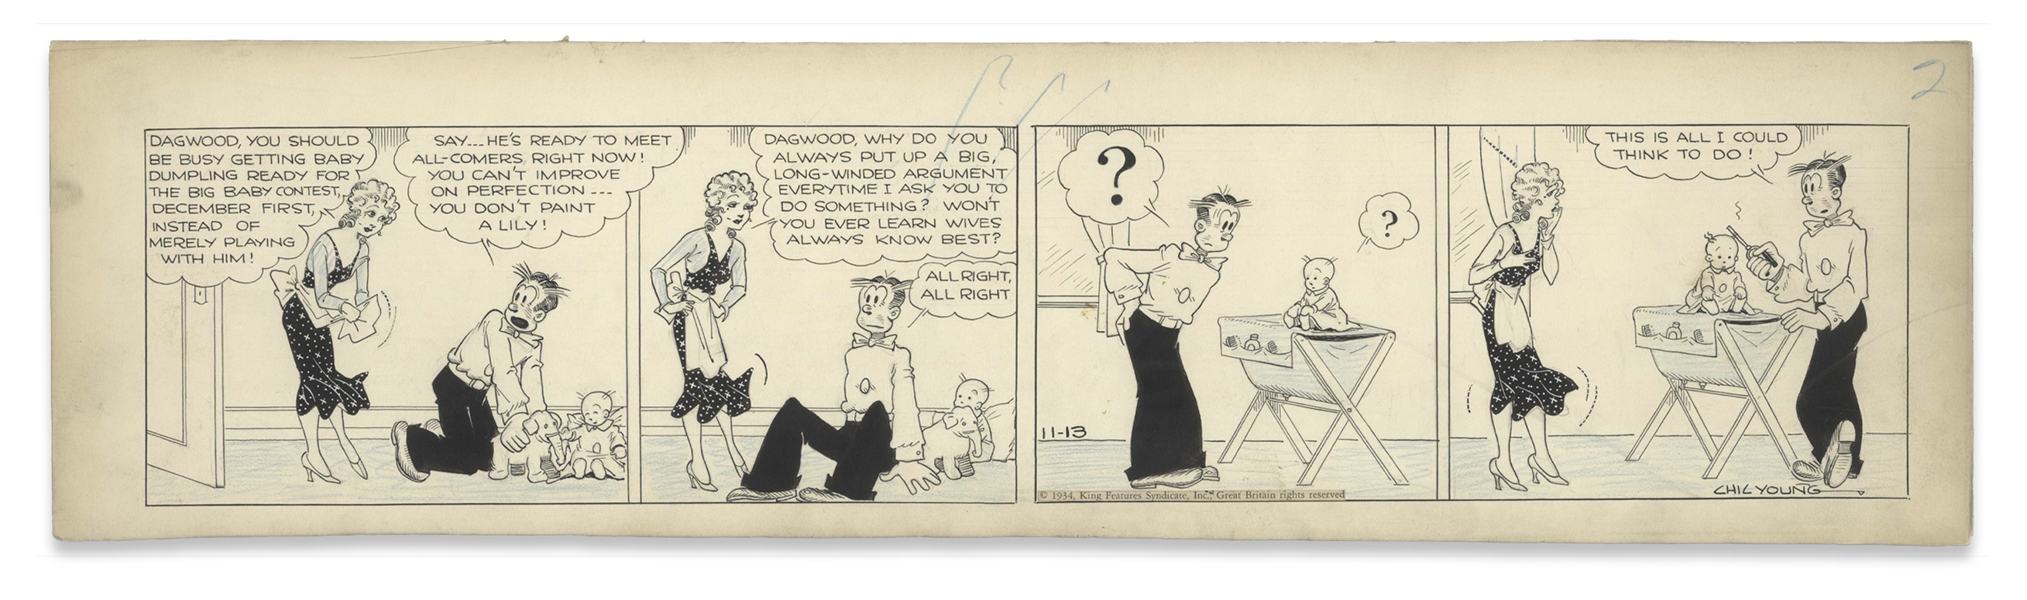 Chic Young Hand-Drawn ''Blondie'' Comic Strip From 1934 Titled ''The Barber's Itch'' -- Dagwood Primps Baby Dumpling for a Baby Contest